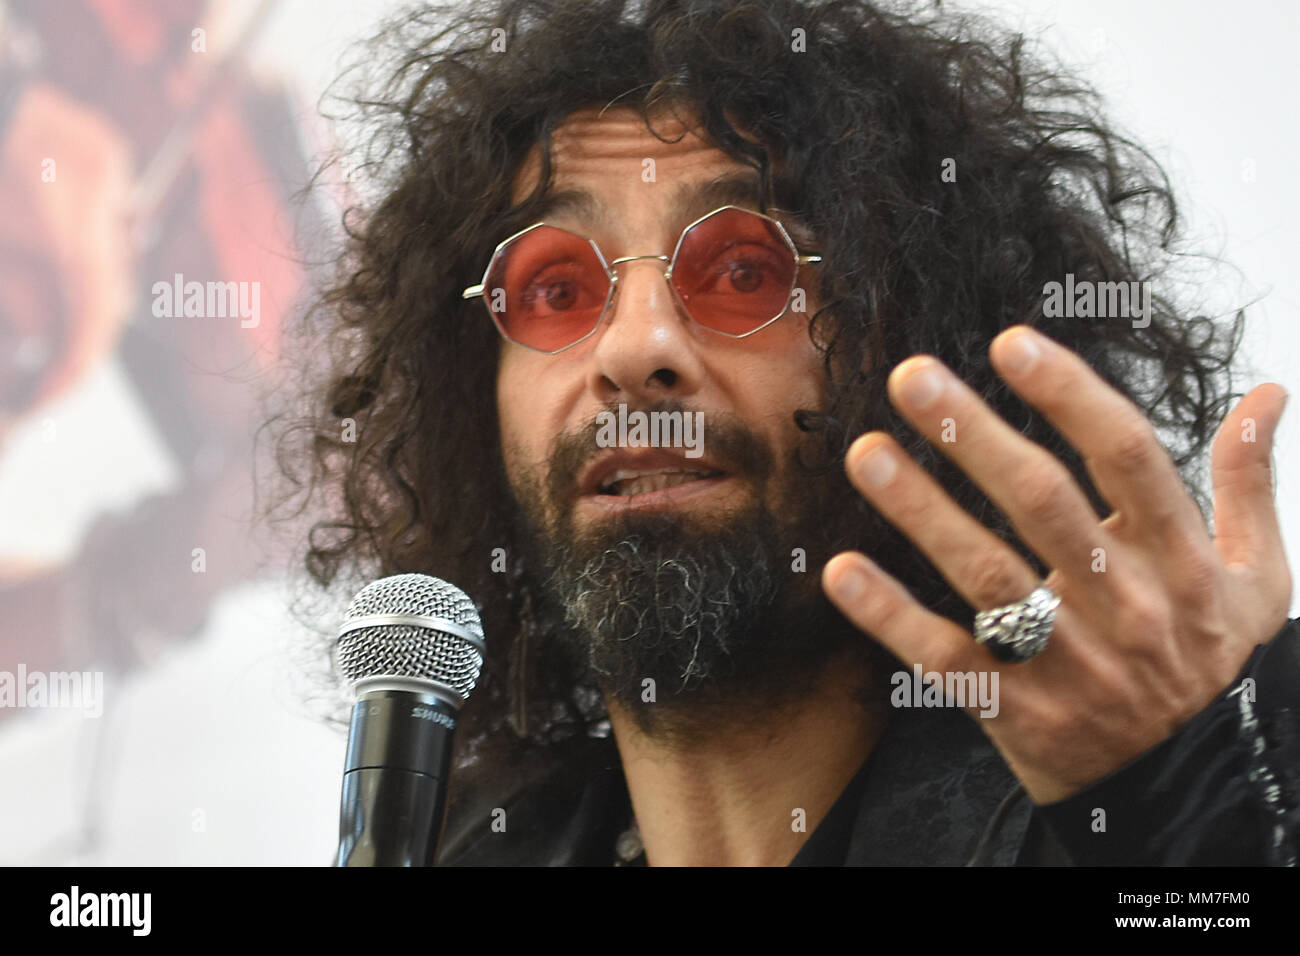 Mexico City, Mexico. 9th May, 2018. Violinist Ara Malikian seen during a  press conference to announce his 'The Incredible World Tour of Violin' at  the National Auditorium in Mexico City. Credit: Carlos